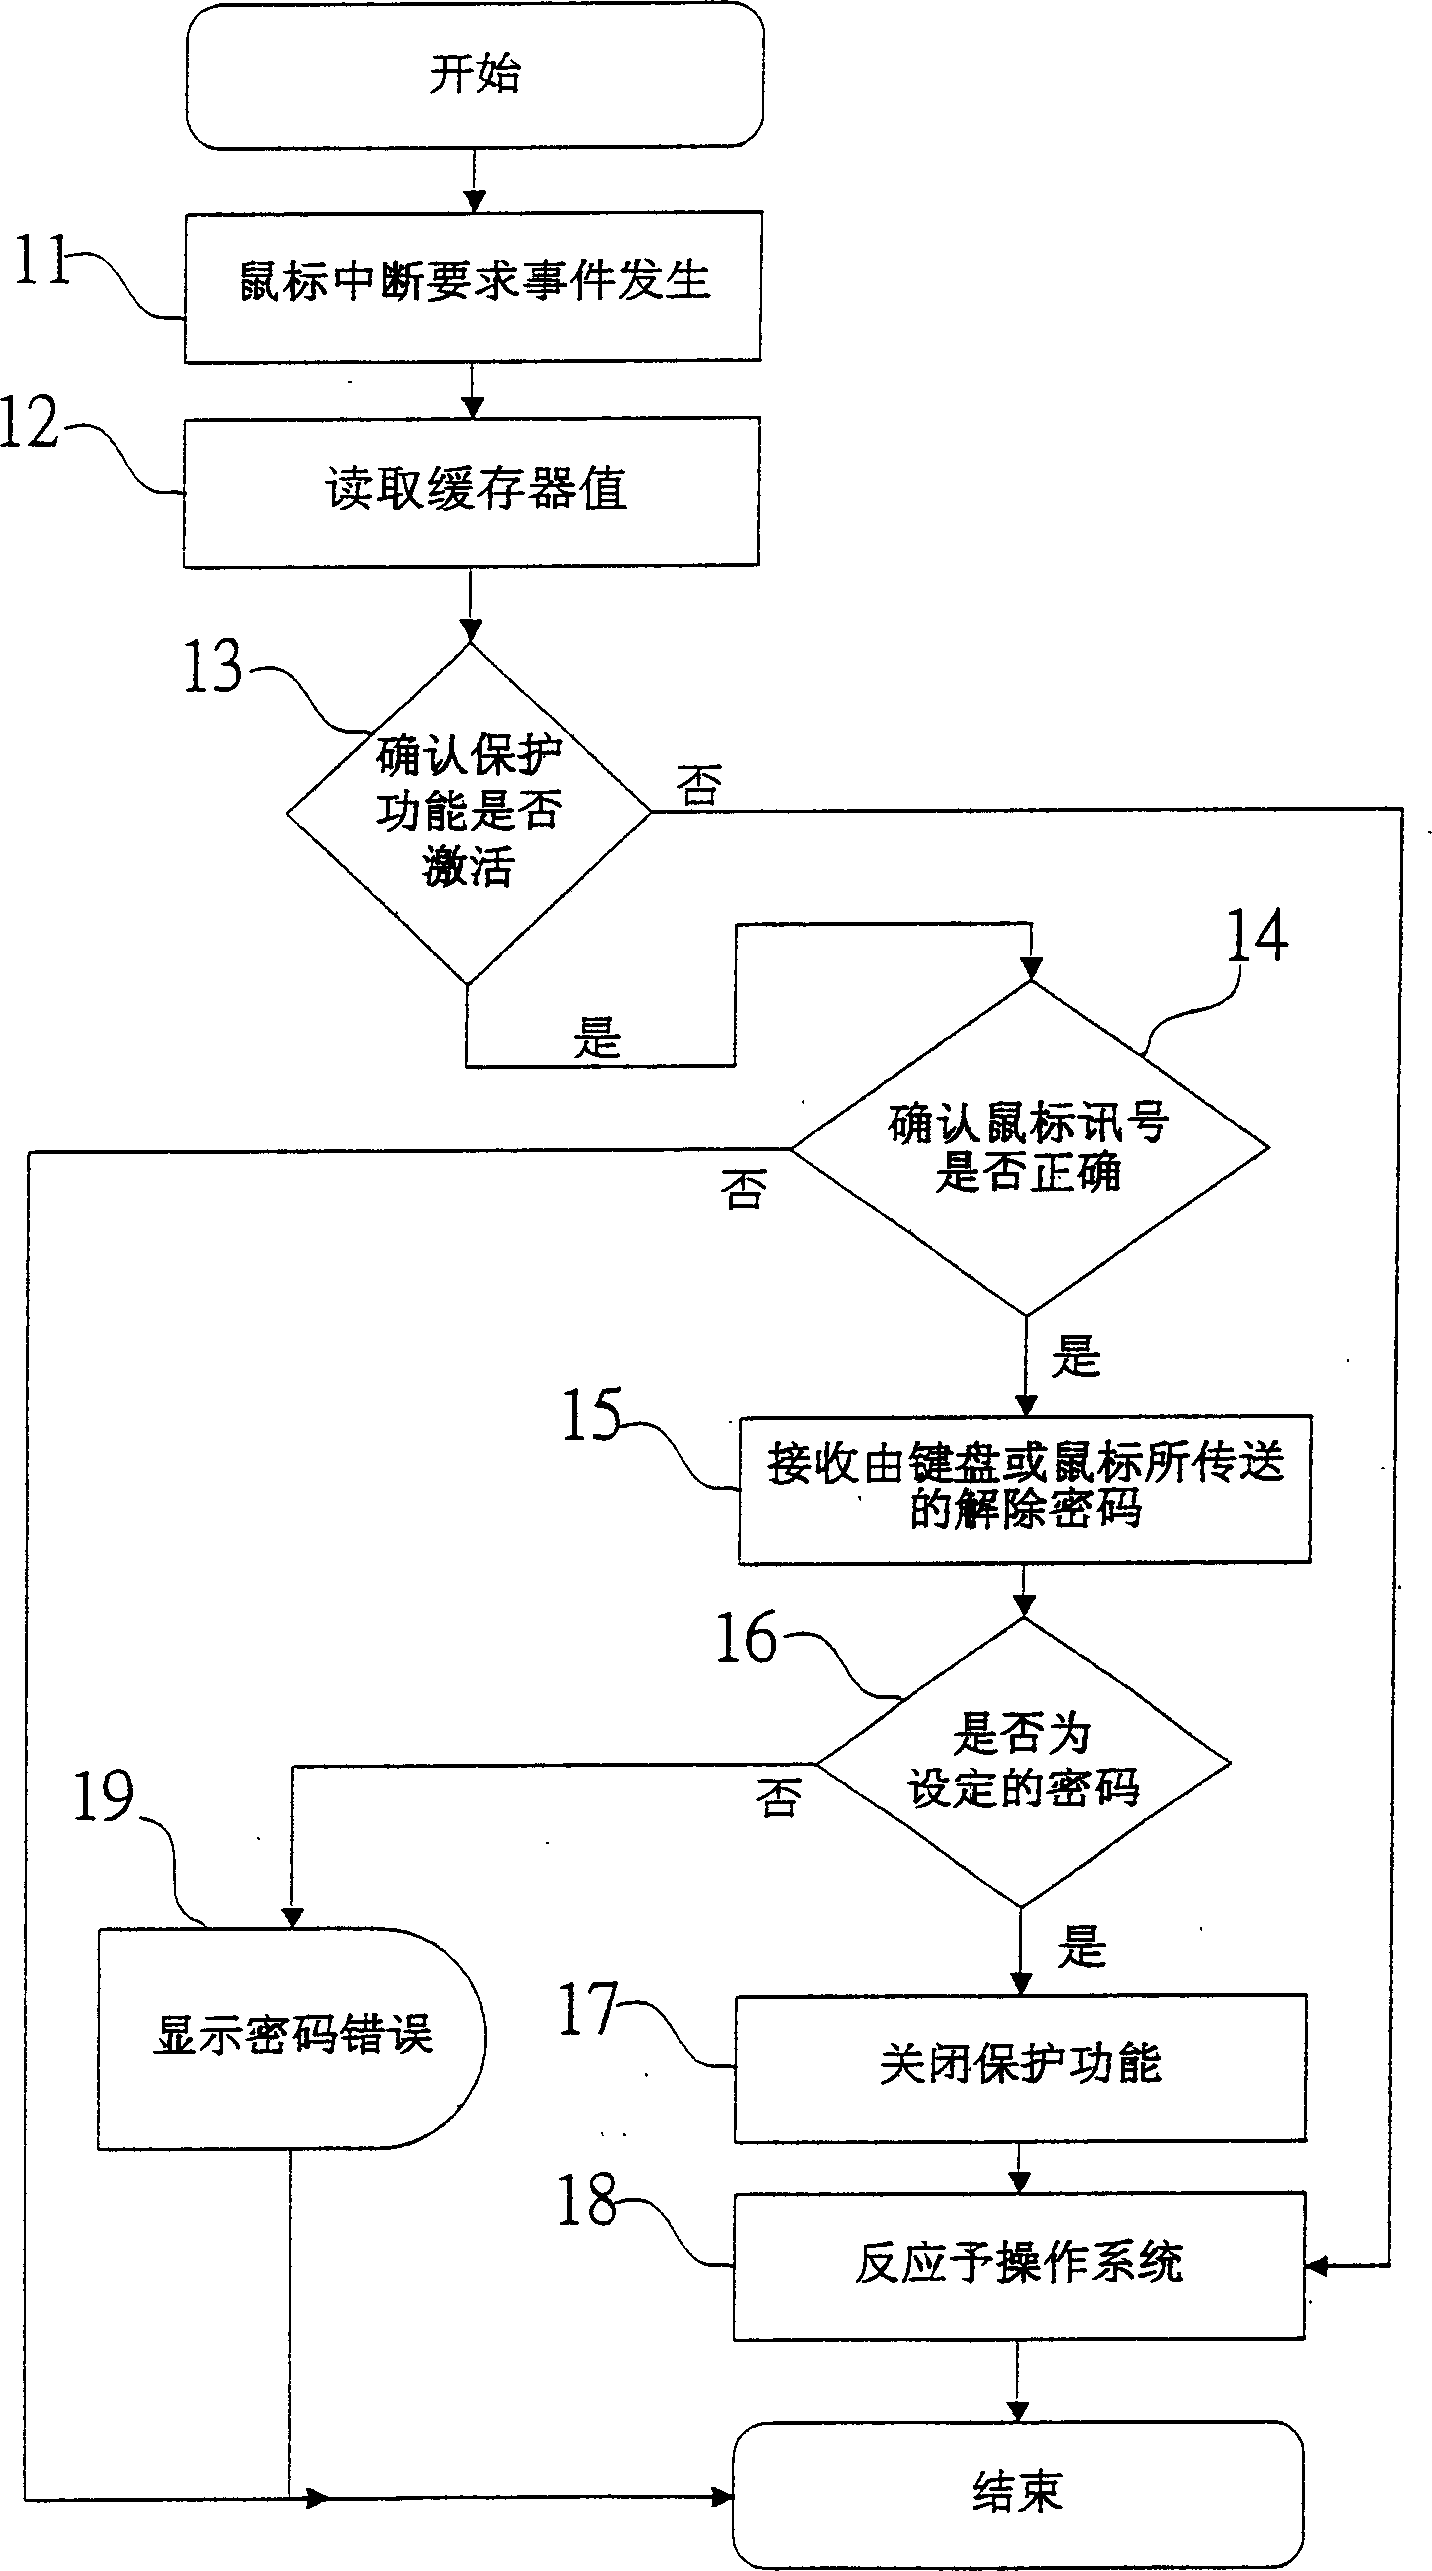 Driving system for achieving information protection by means of a mouse